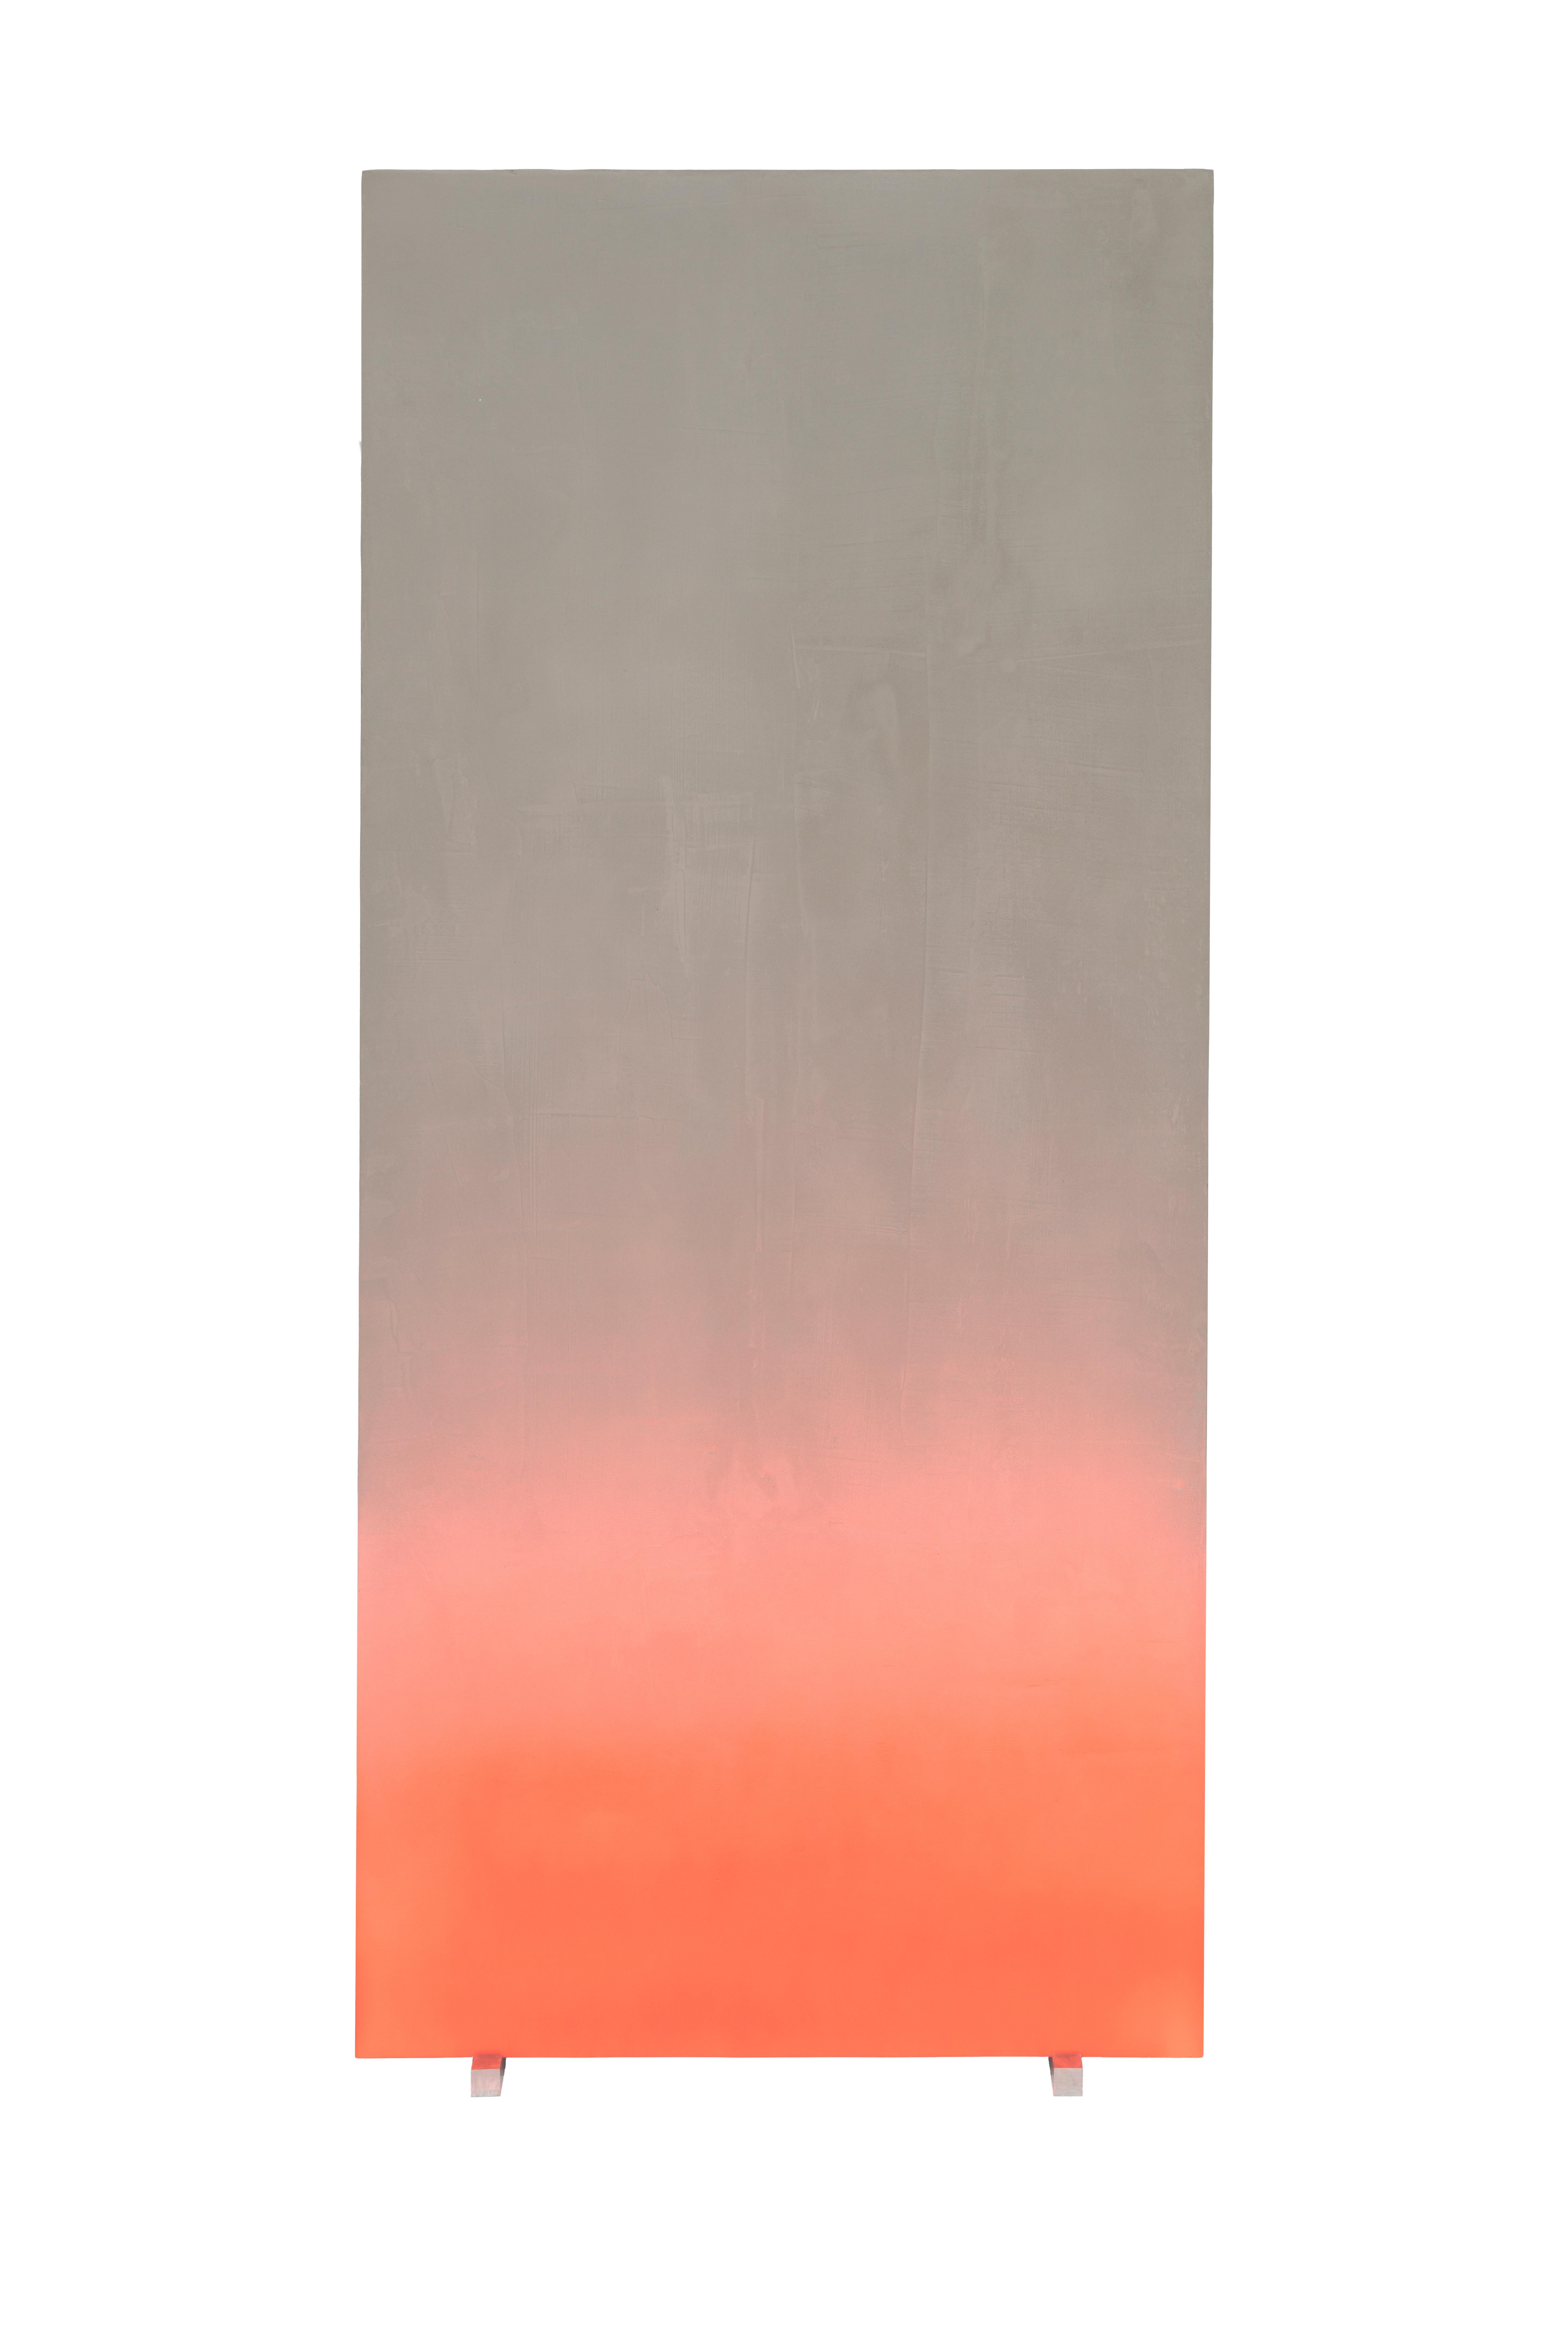 Pennacchio Argentato, Slab Charge, 2011 - ongoing, mixed material, red